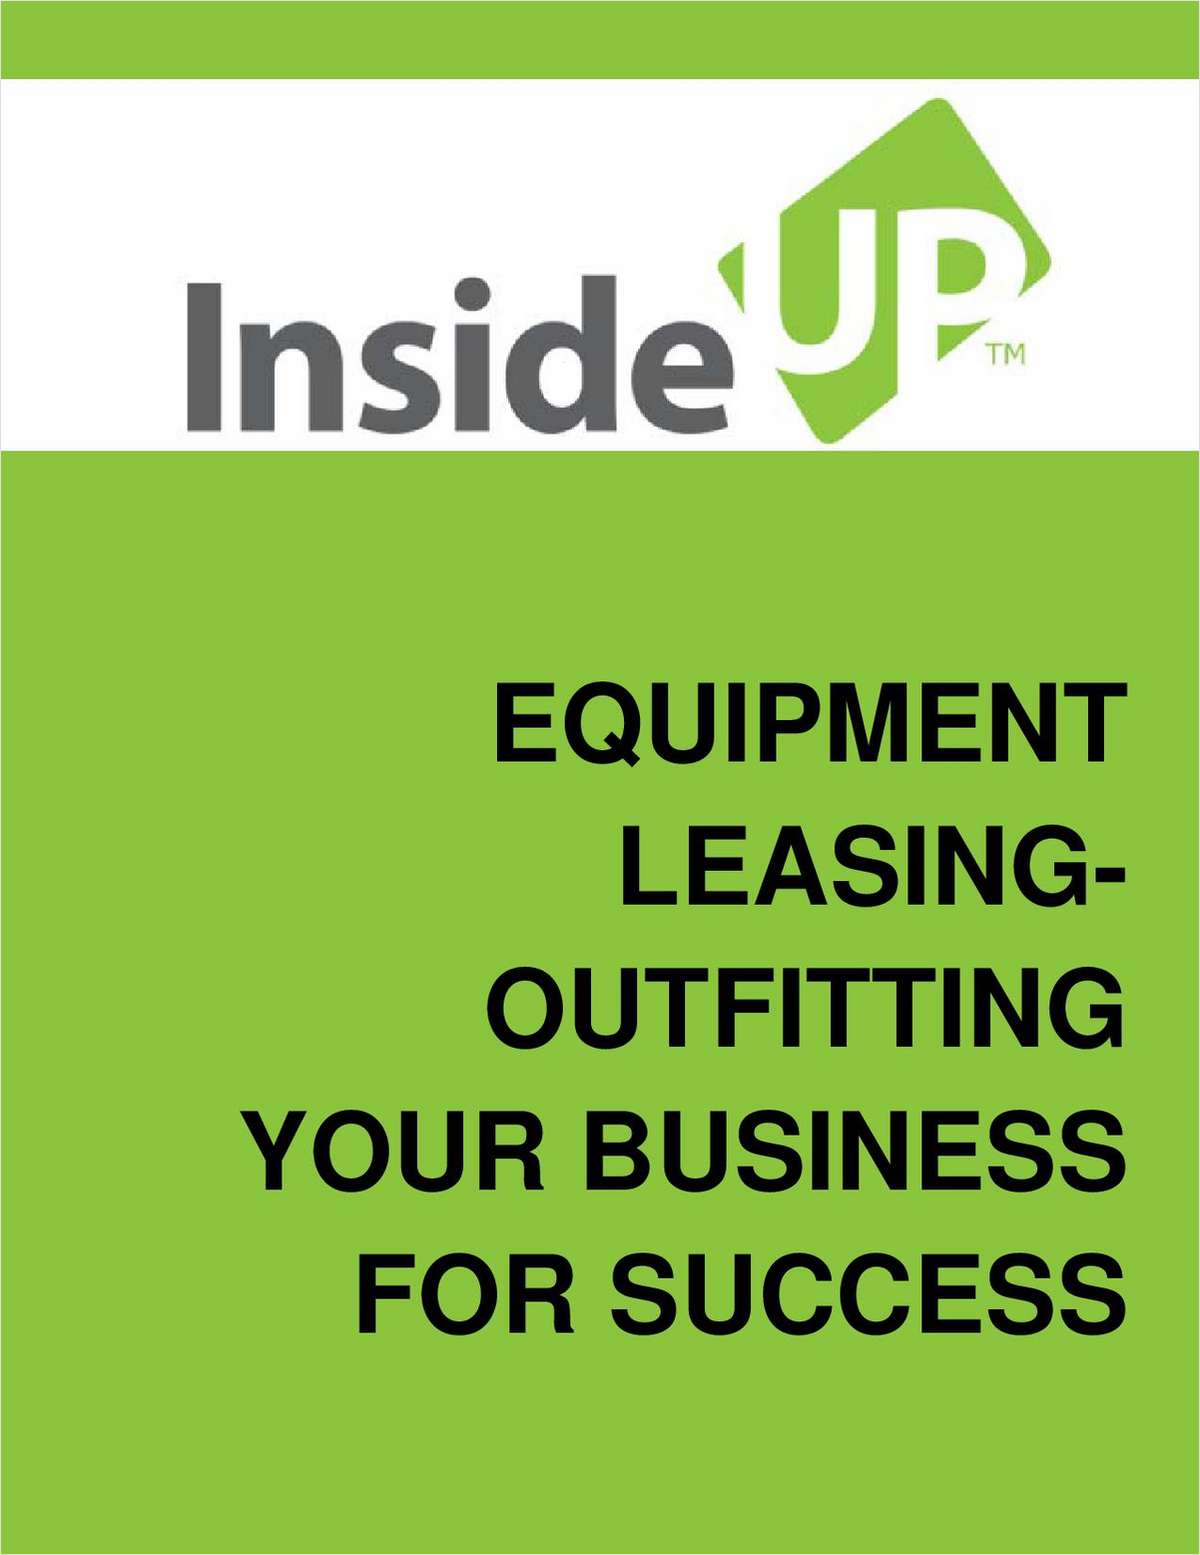 Key Benefits of Leasing Equipment for Your Business